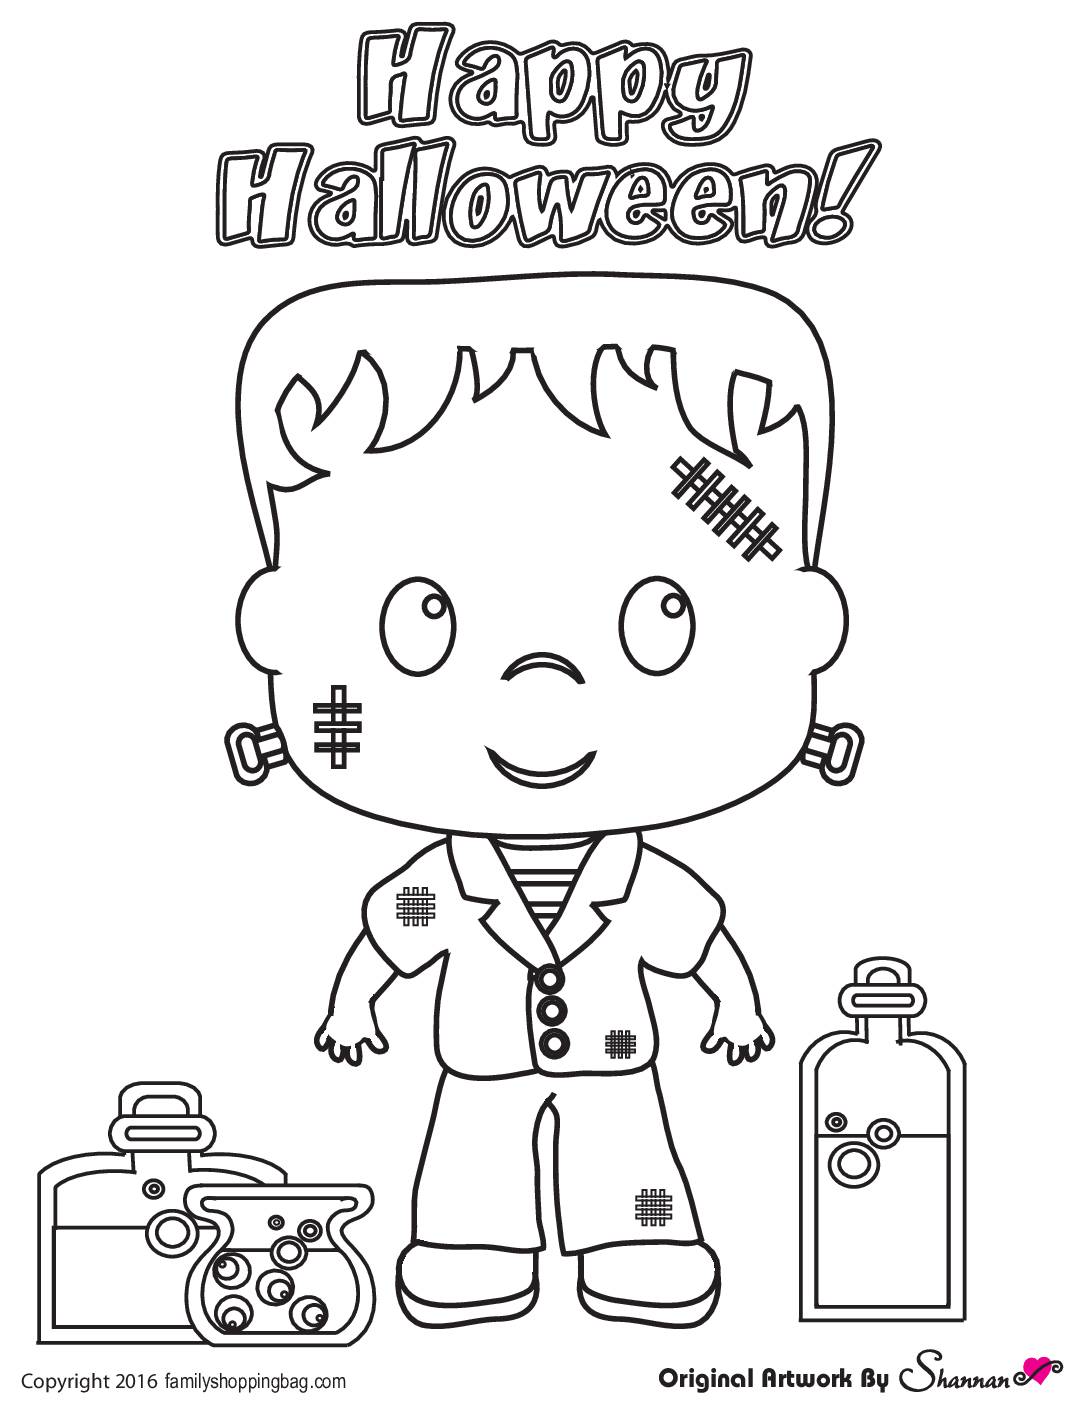 Halloween Coloring Page  pdf